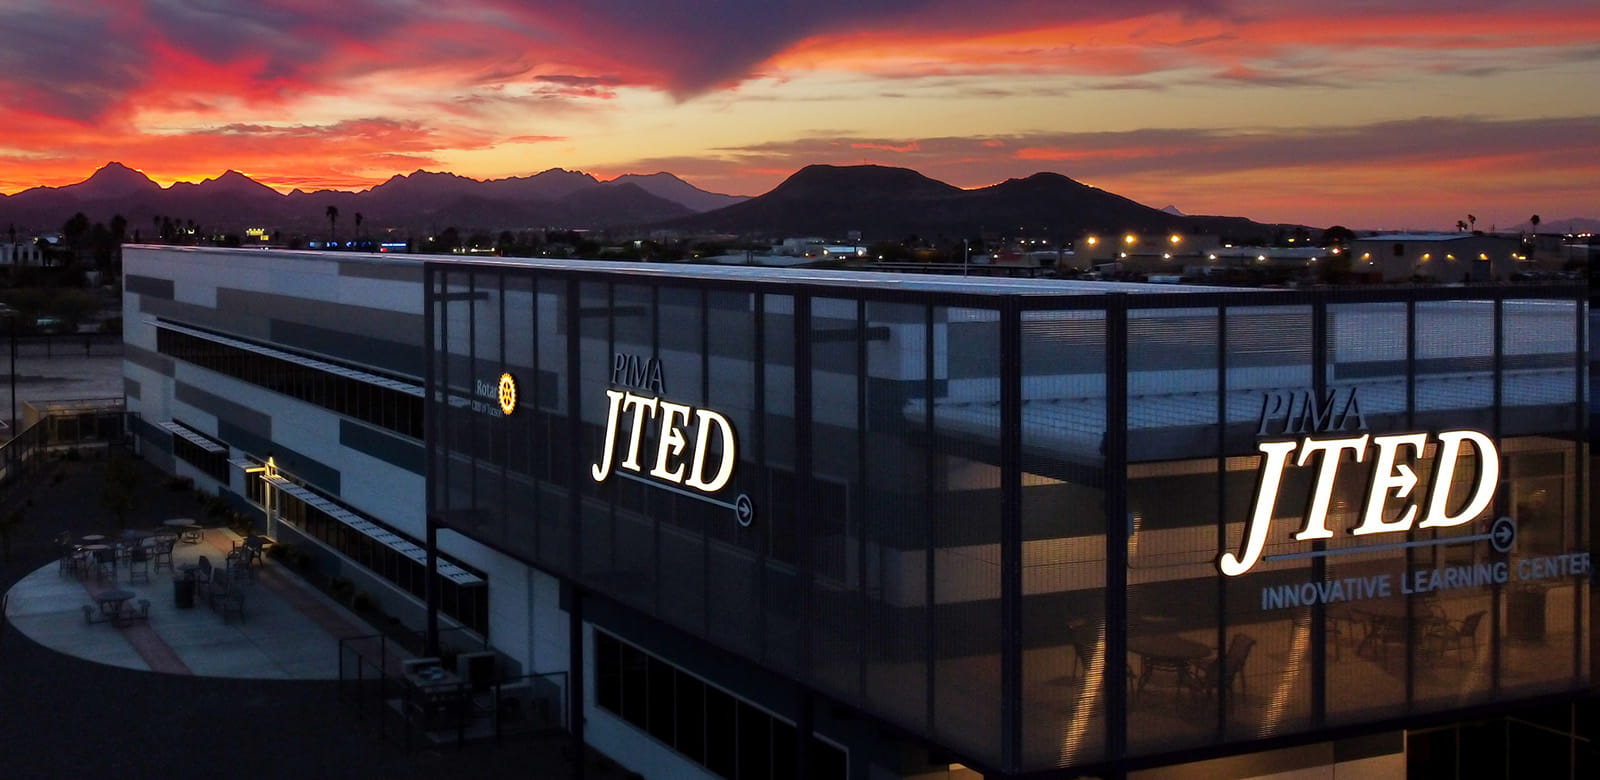 The flagship campus of Pima JTED (Joint Technical Education District) in Tucson, Arizona.